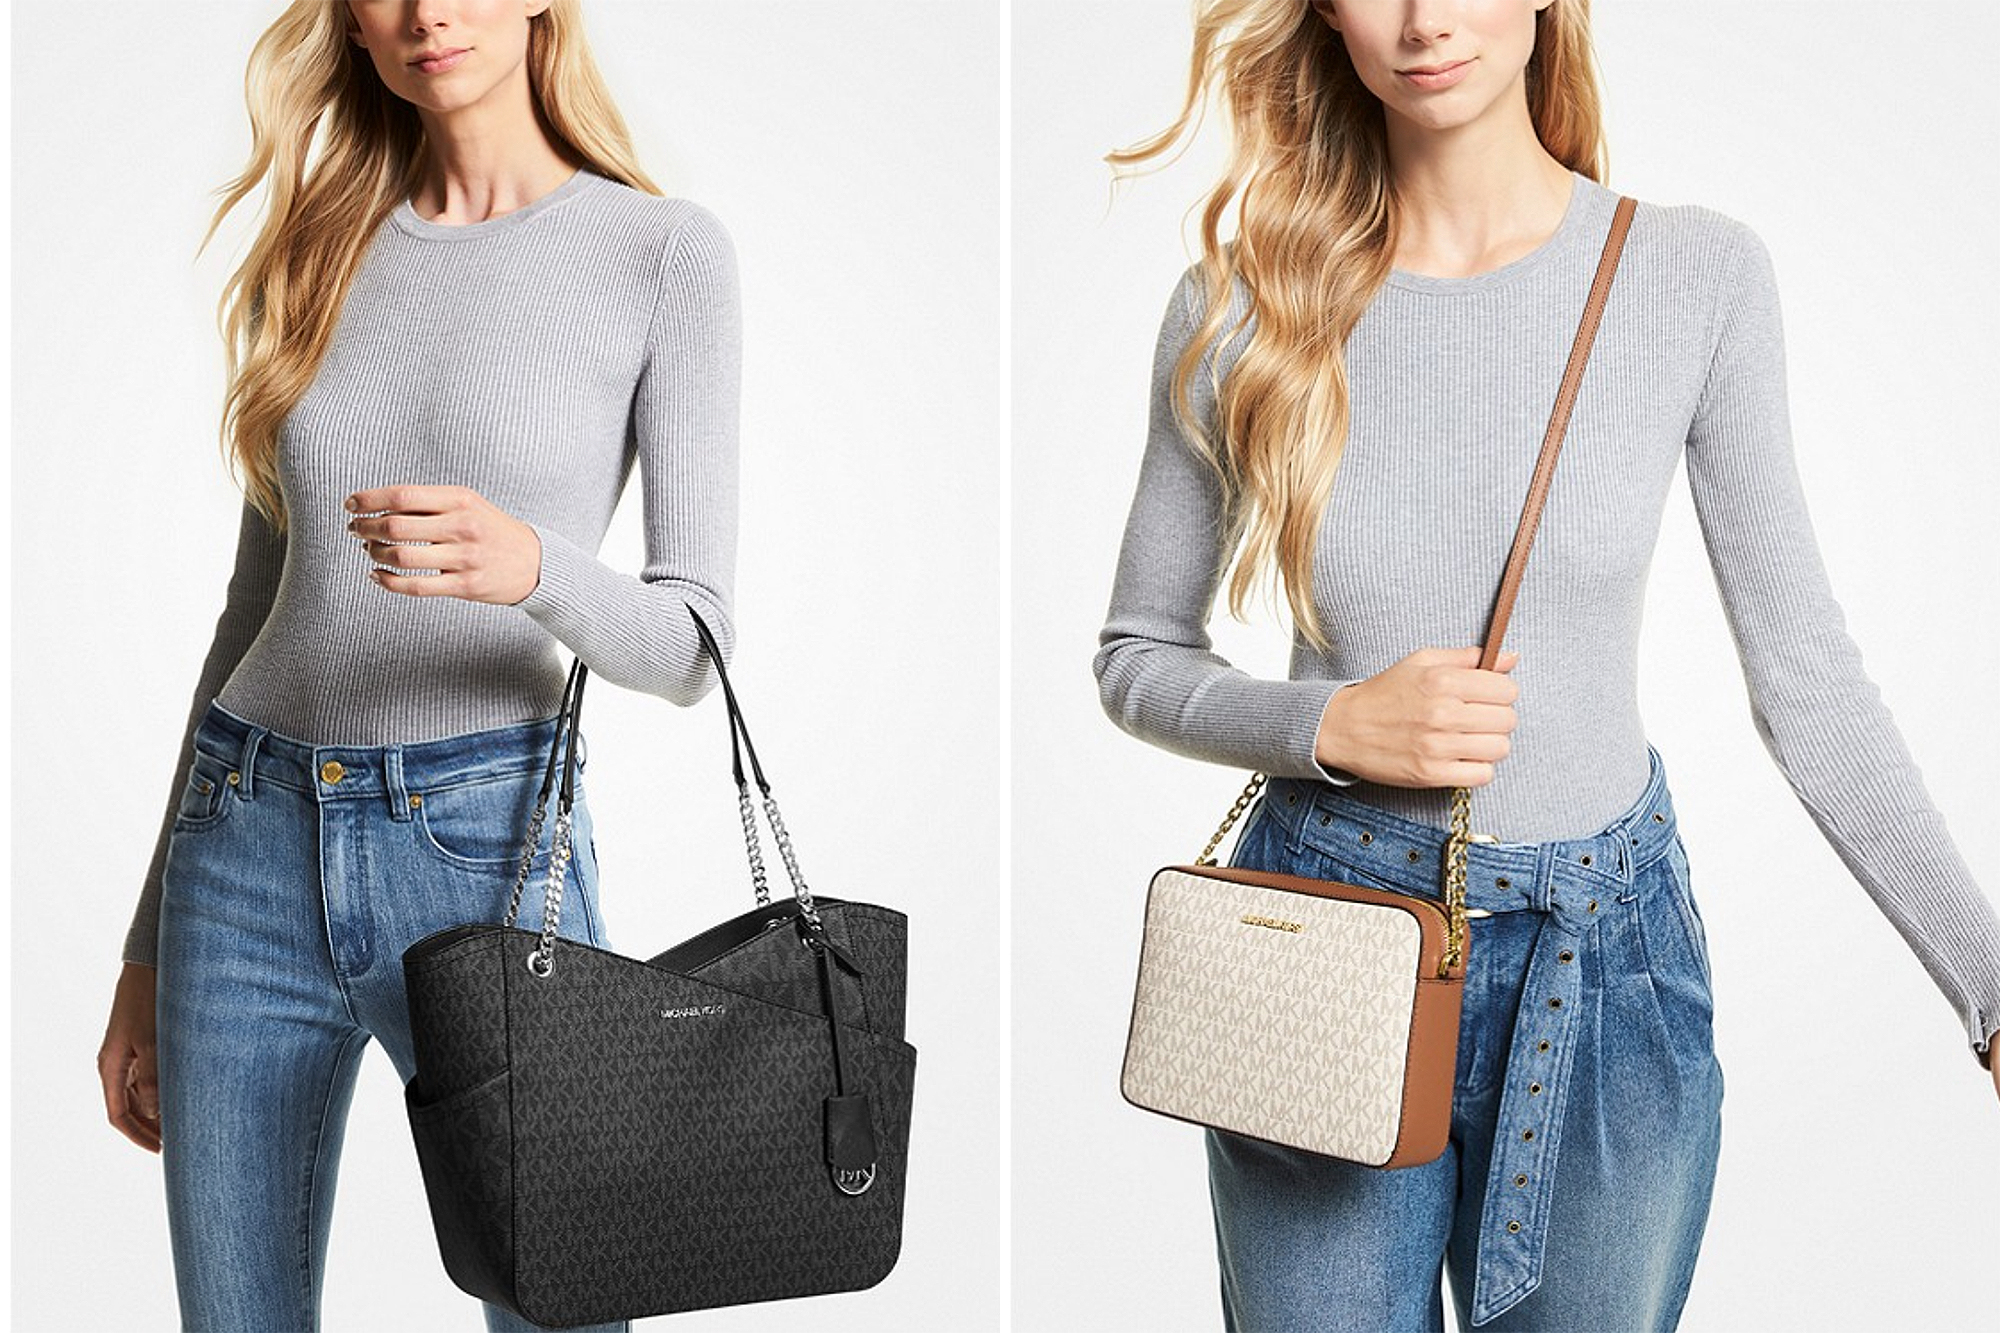 Michael Kors bags: Save 70% on this top-rated leather satchel